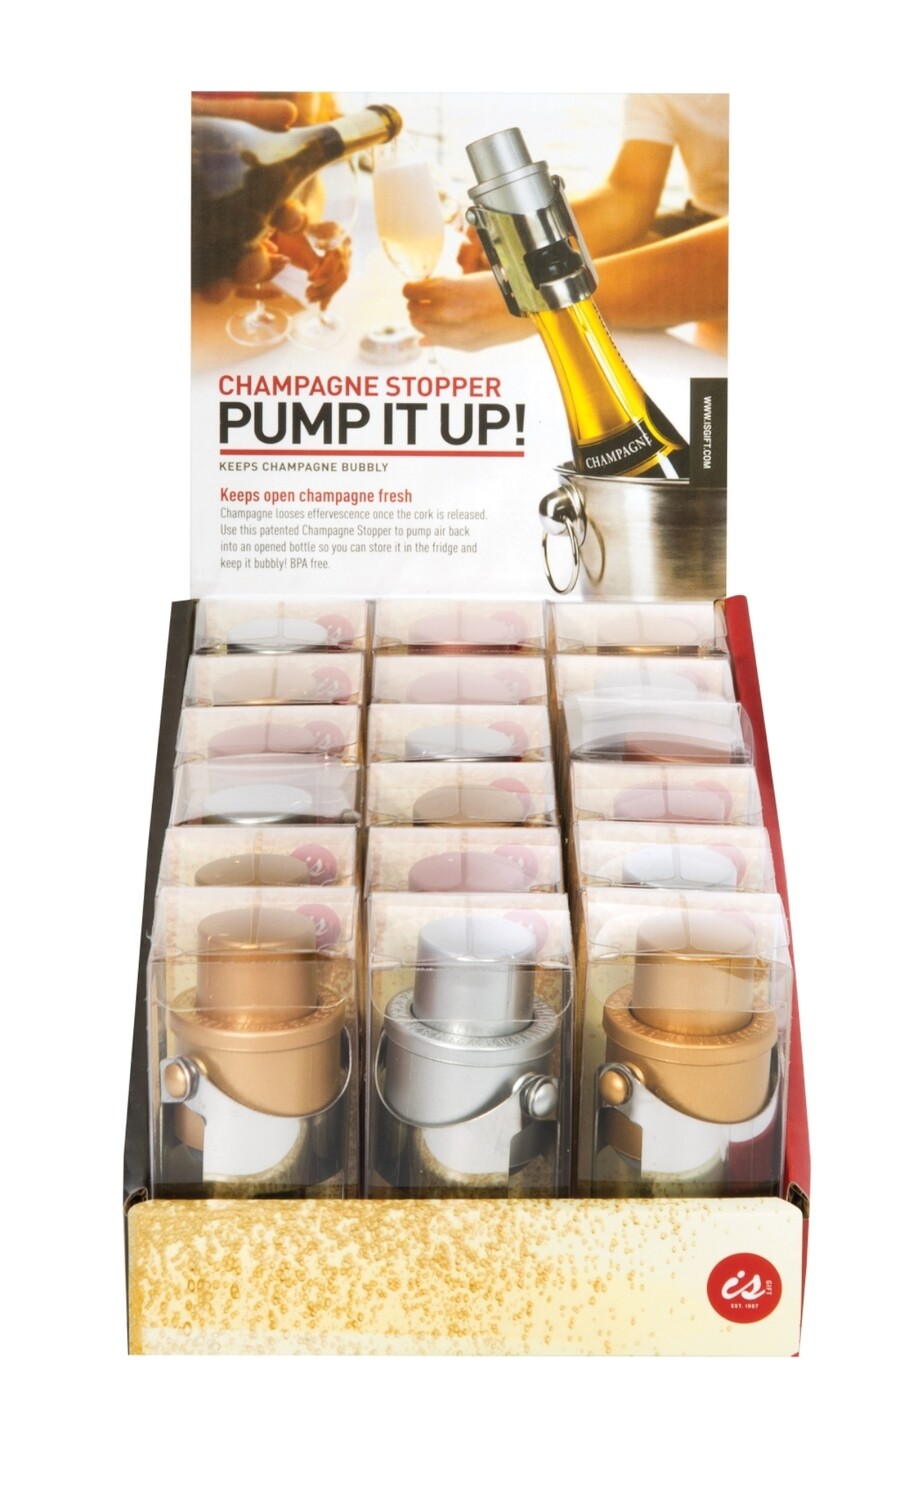 Pump it up! Champagne Stopper